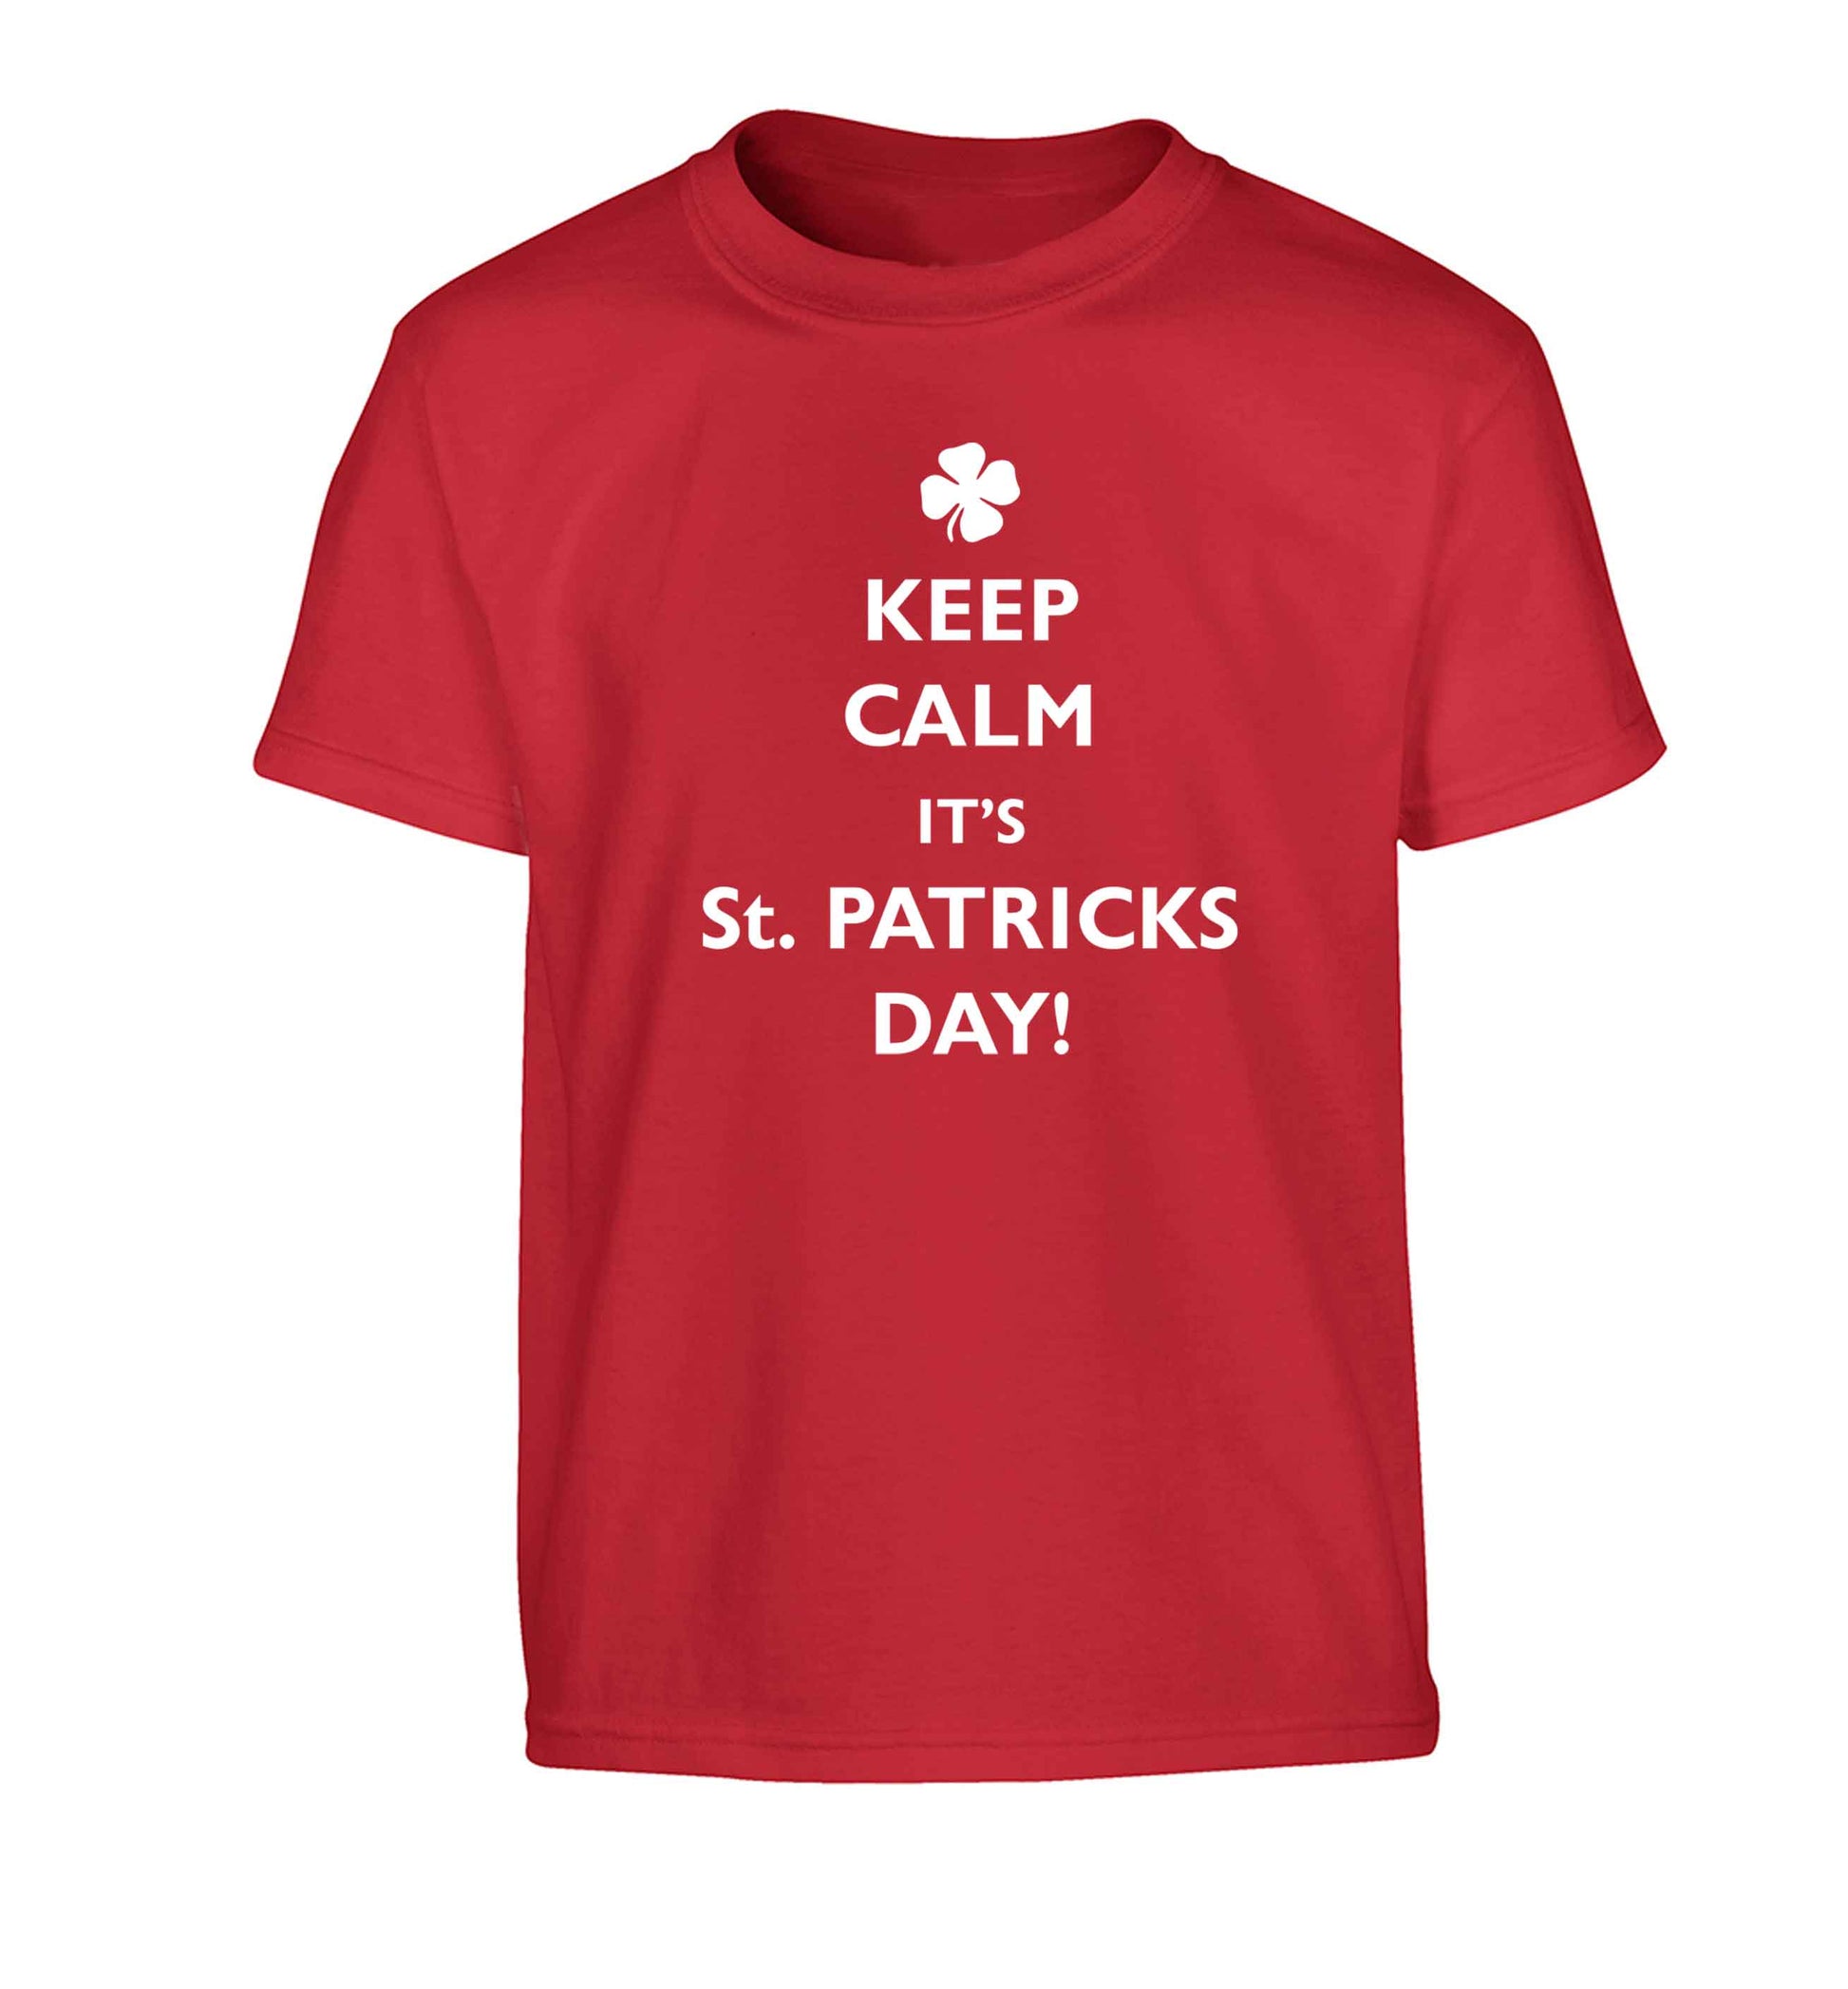 I can't keep calm it's St.Patricks day Children's red Tshirt 12-13 Years